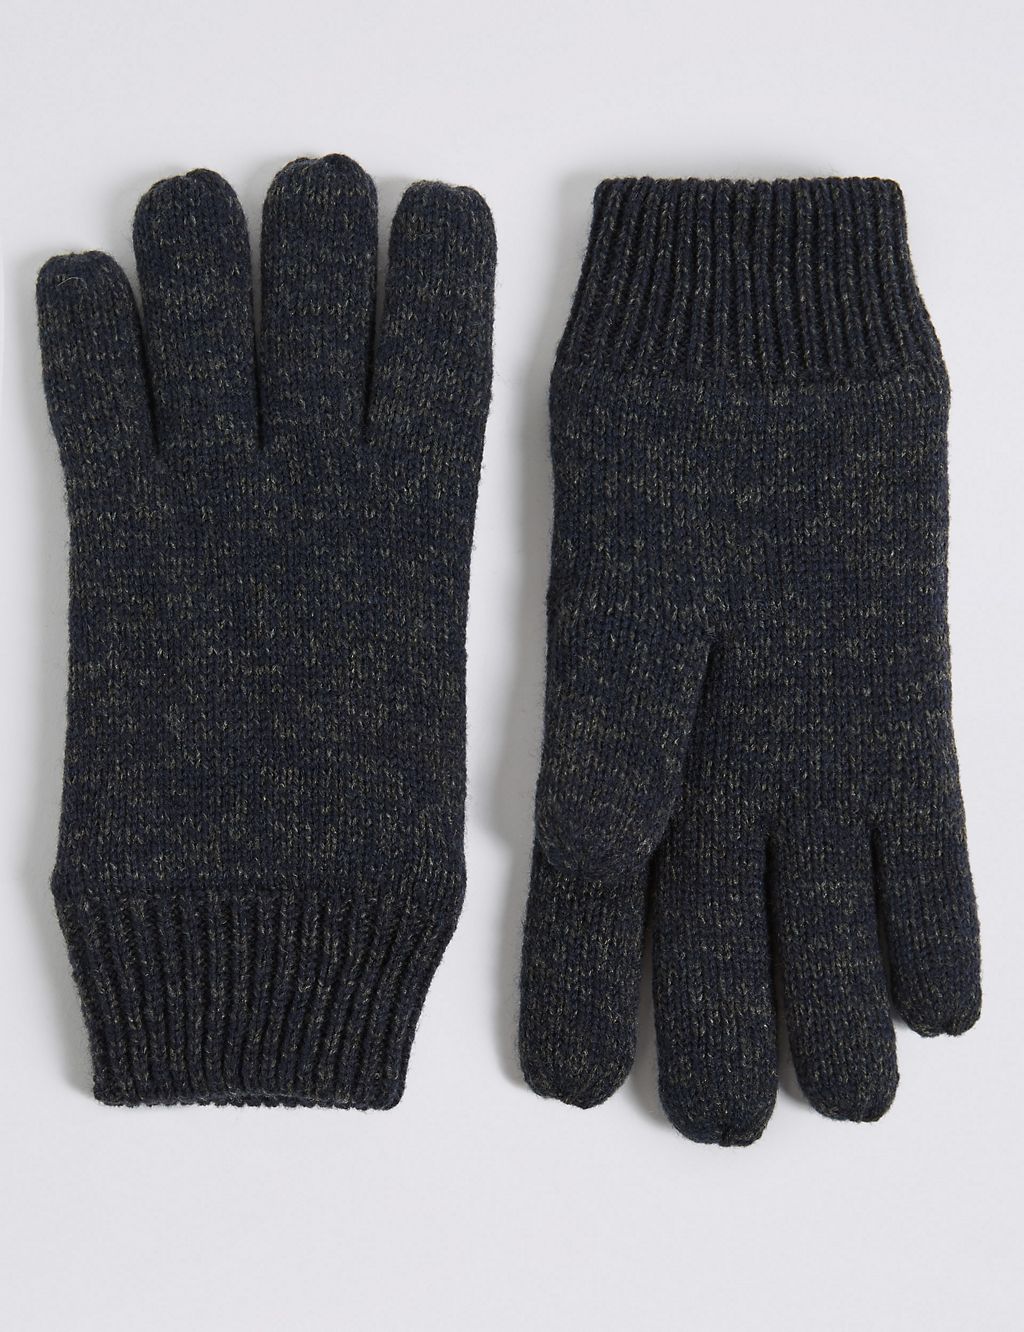 Knitted Gloves 1 of 2